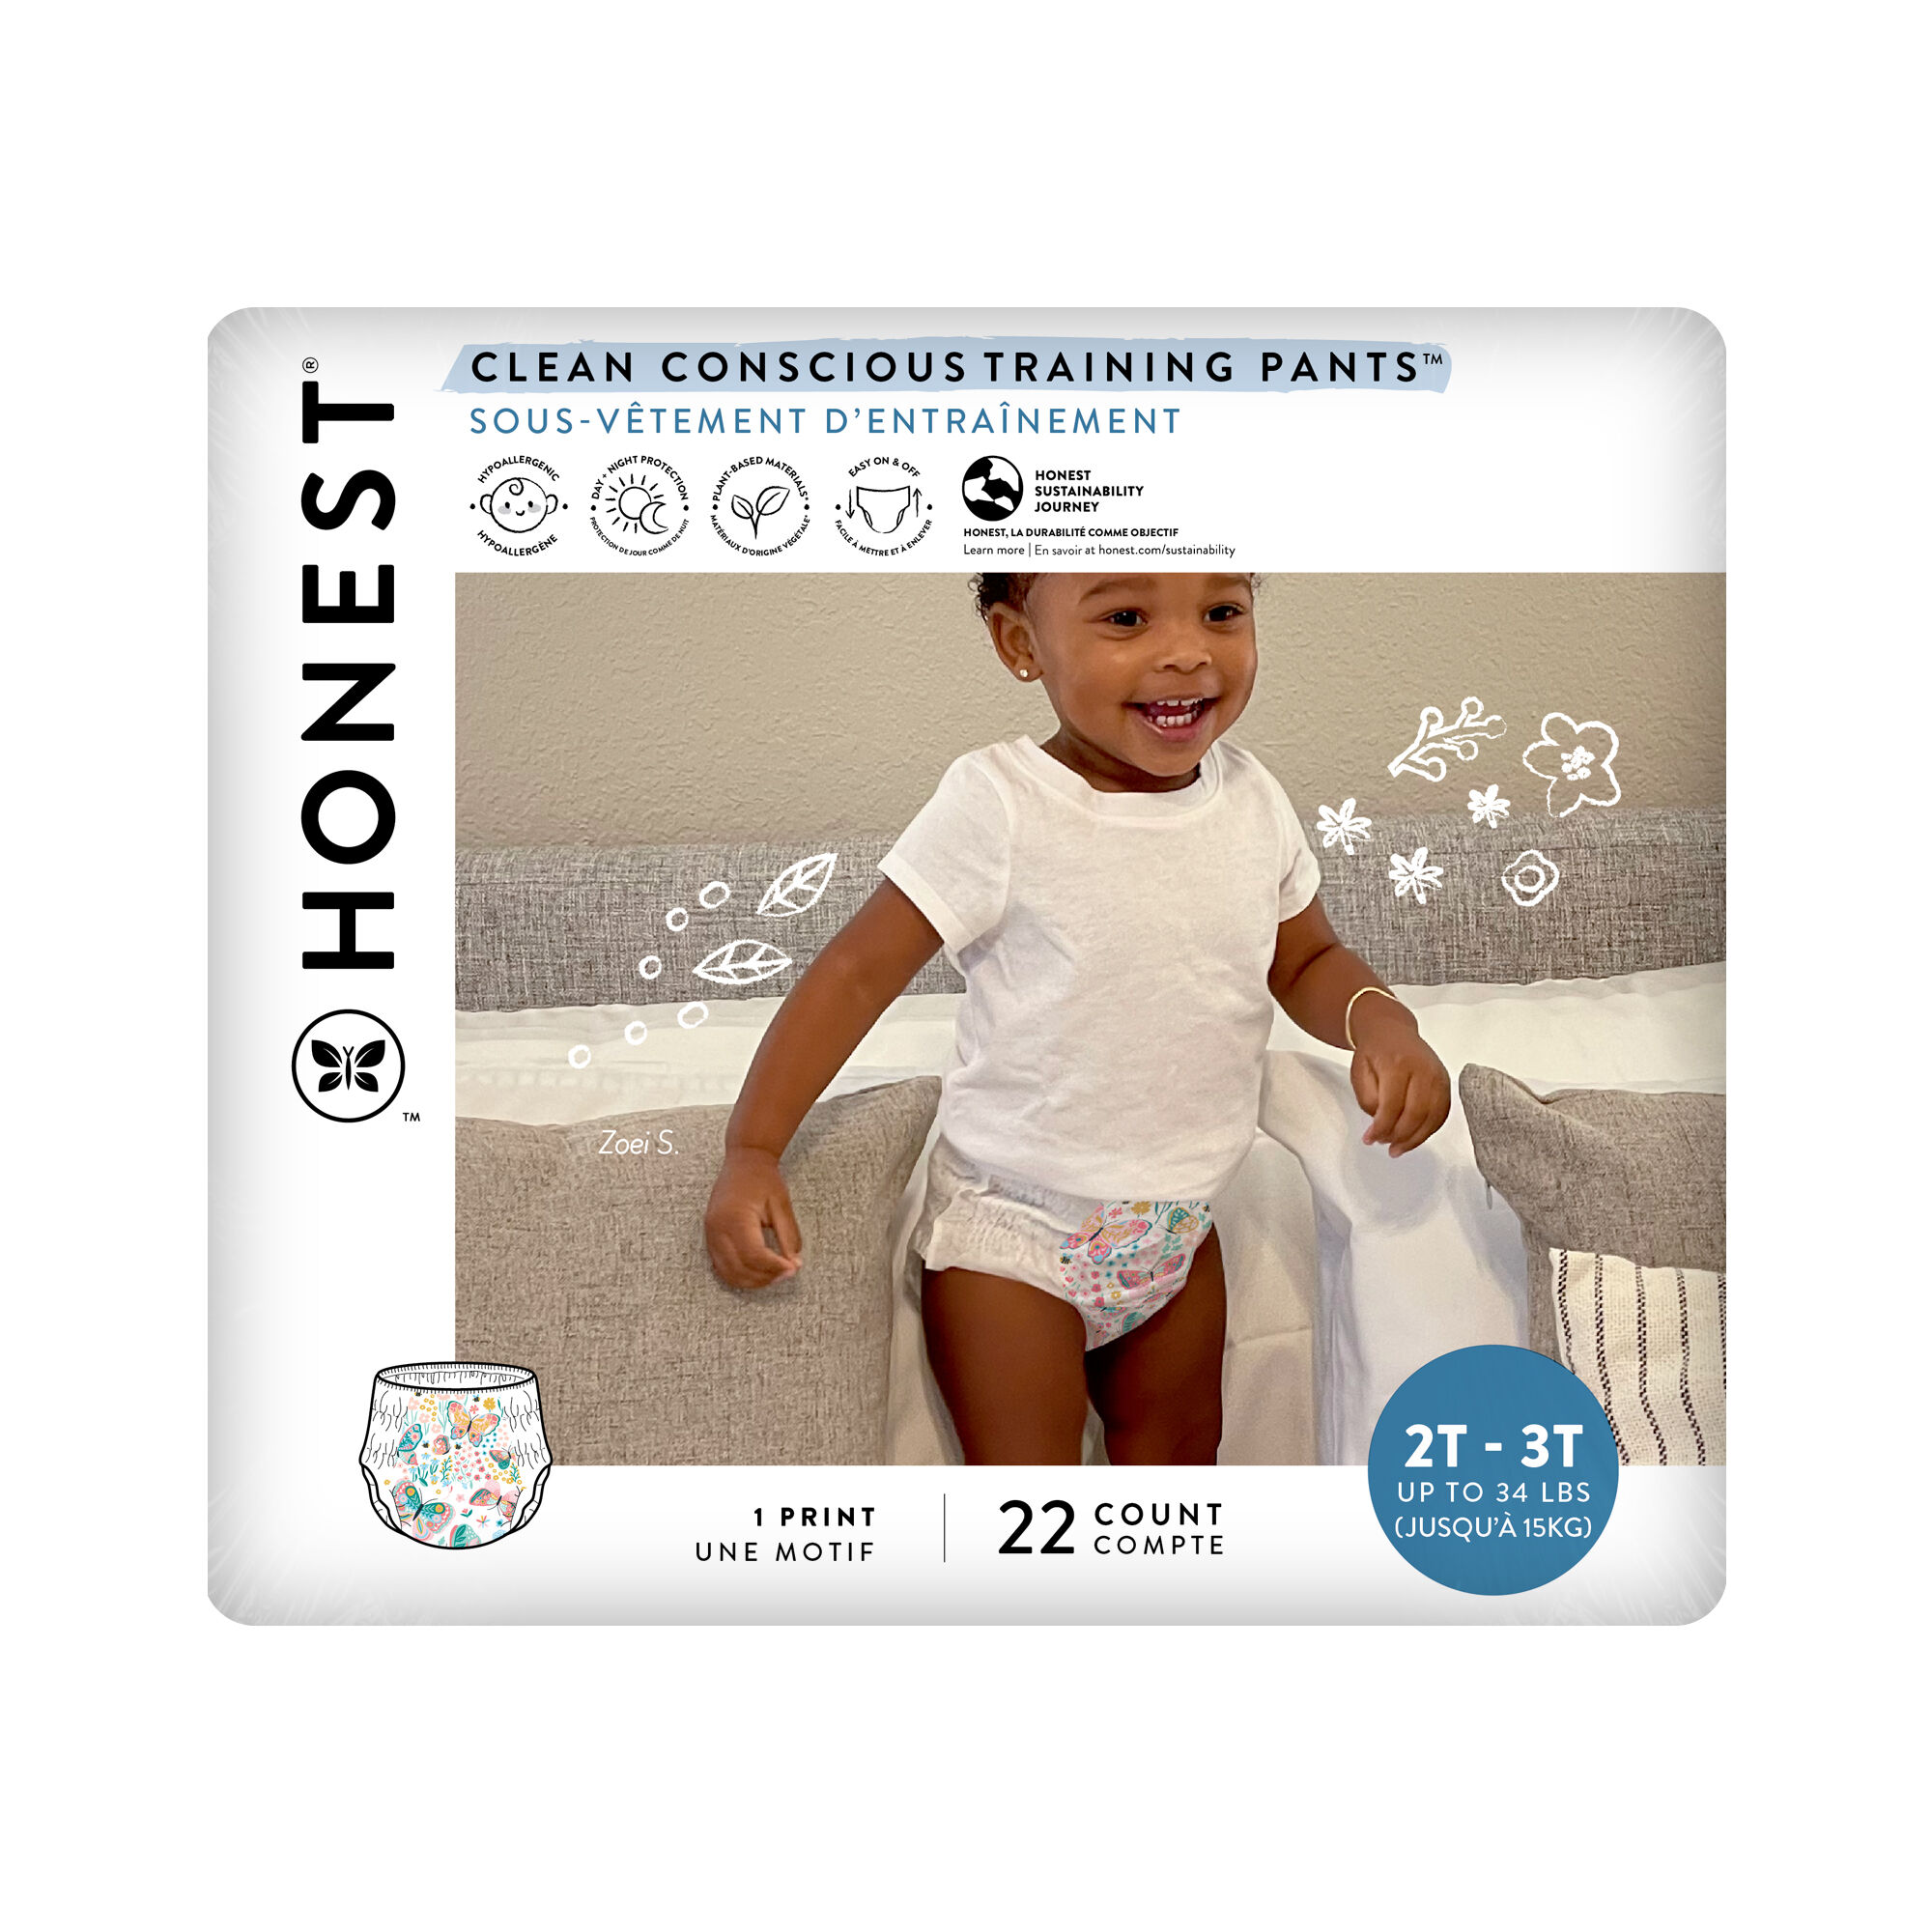 Comforts™ For Toddler Day & Night Training Pants Girls 3T-4T (30